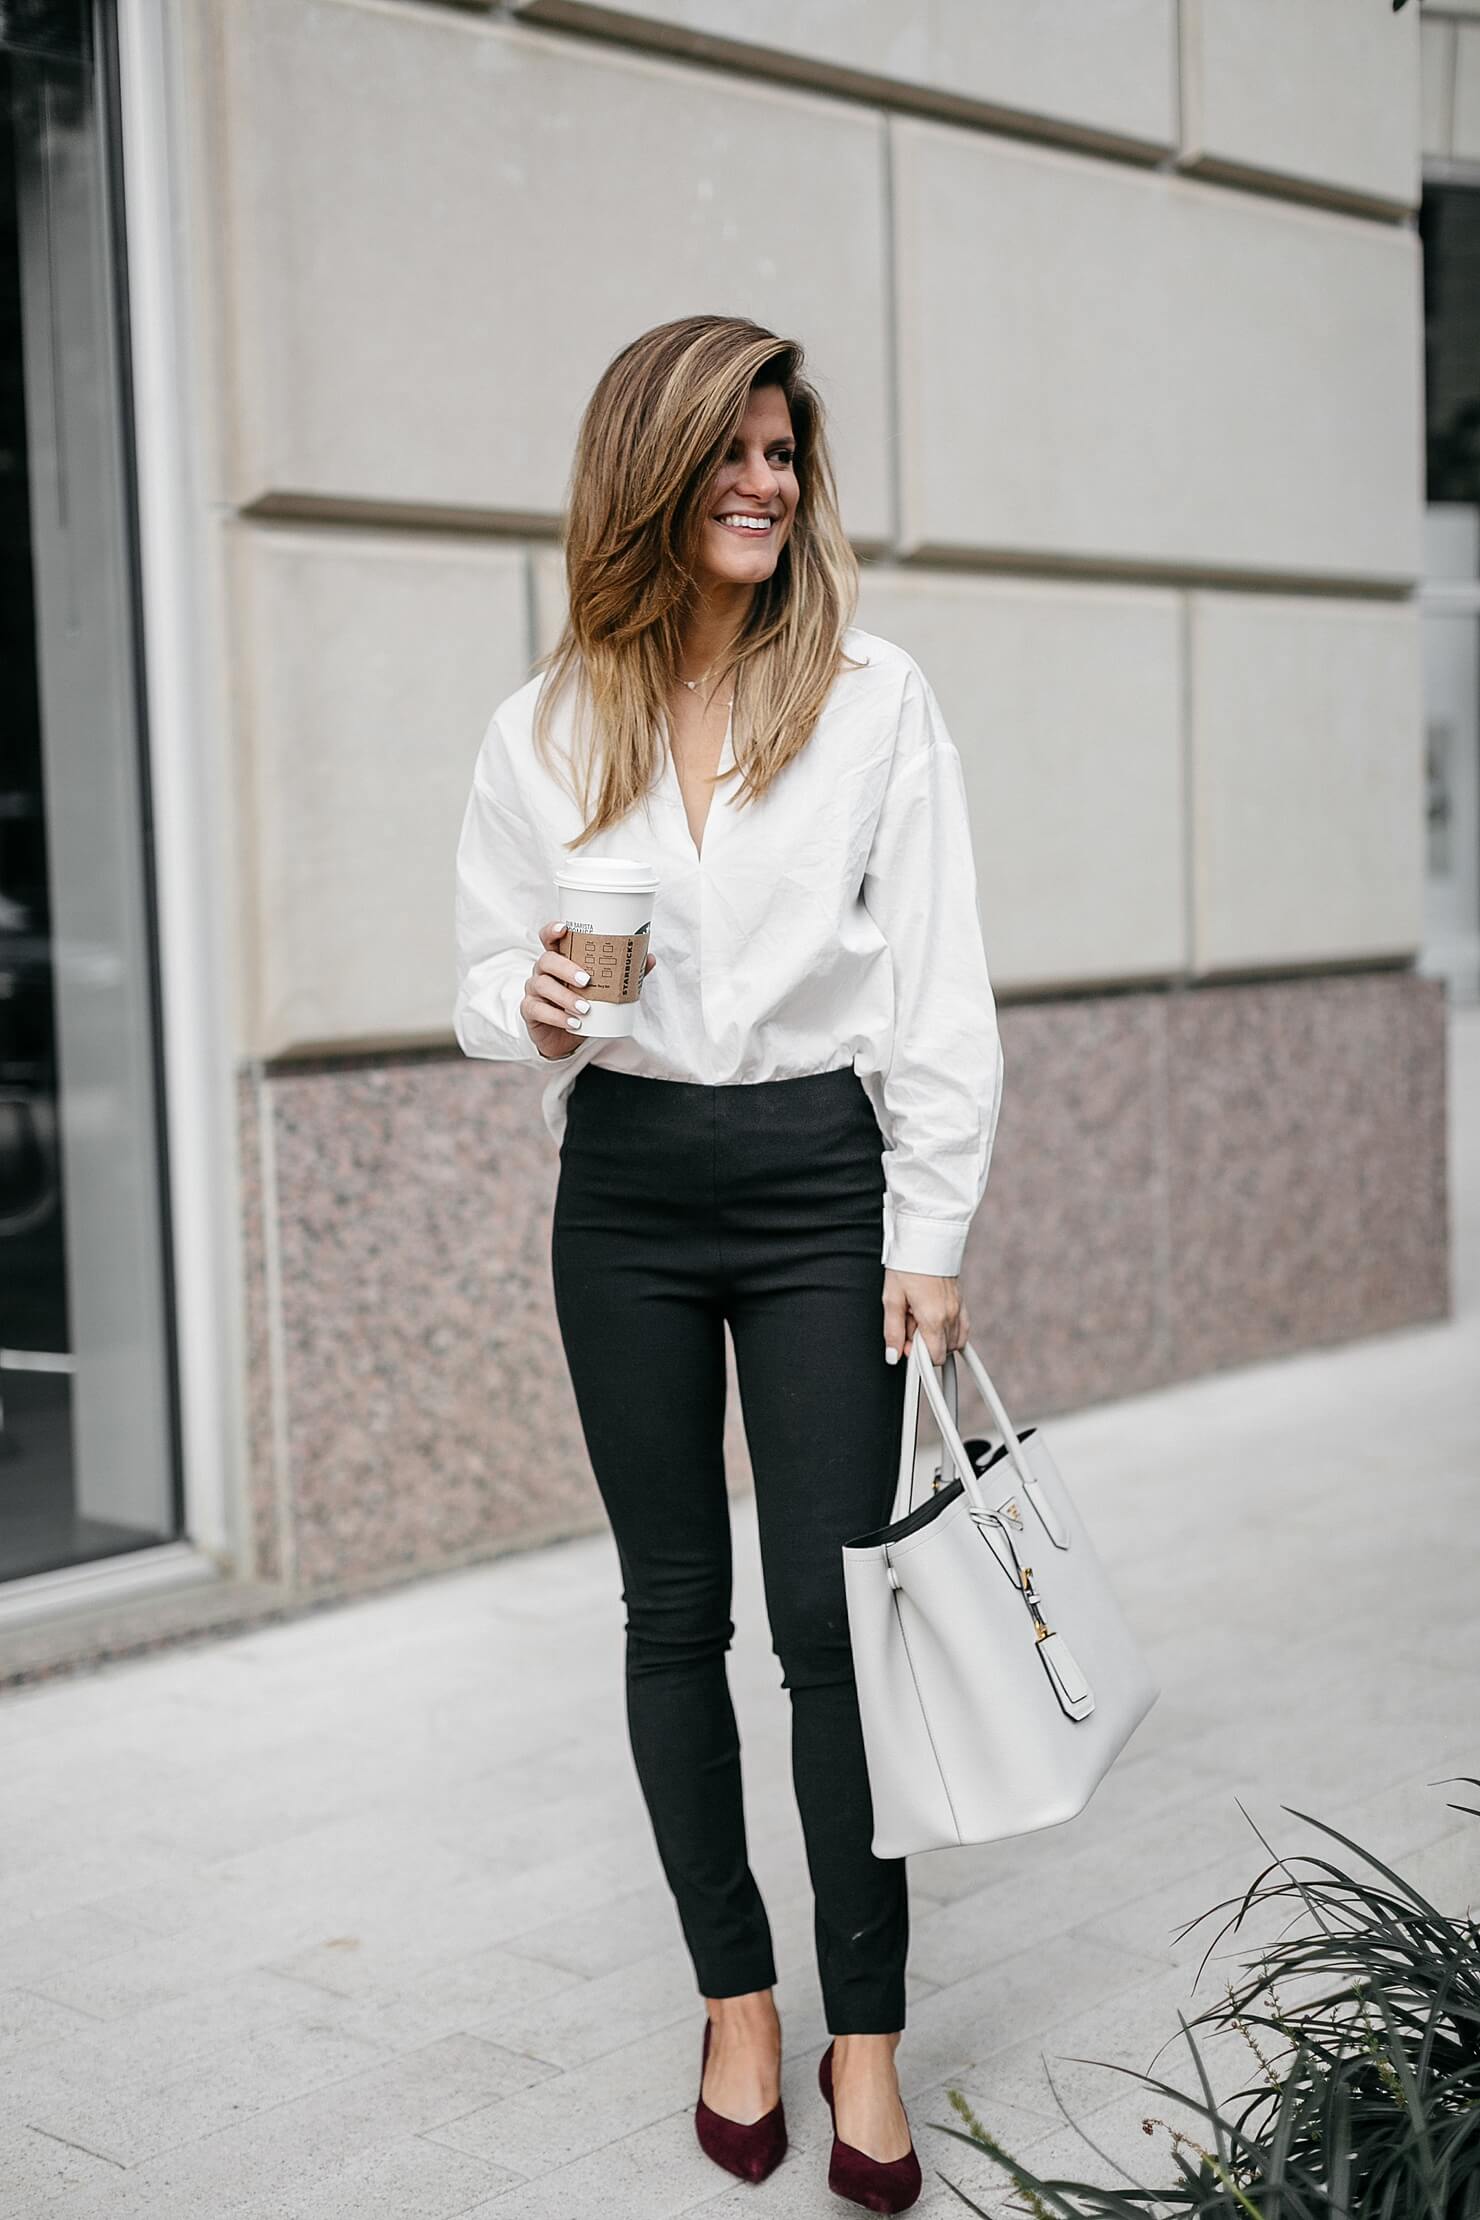 grey lightweight cardigan, white button down shirt, black ponte pants, and kitten heels // business casual outfit ideas